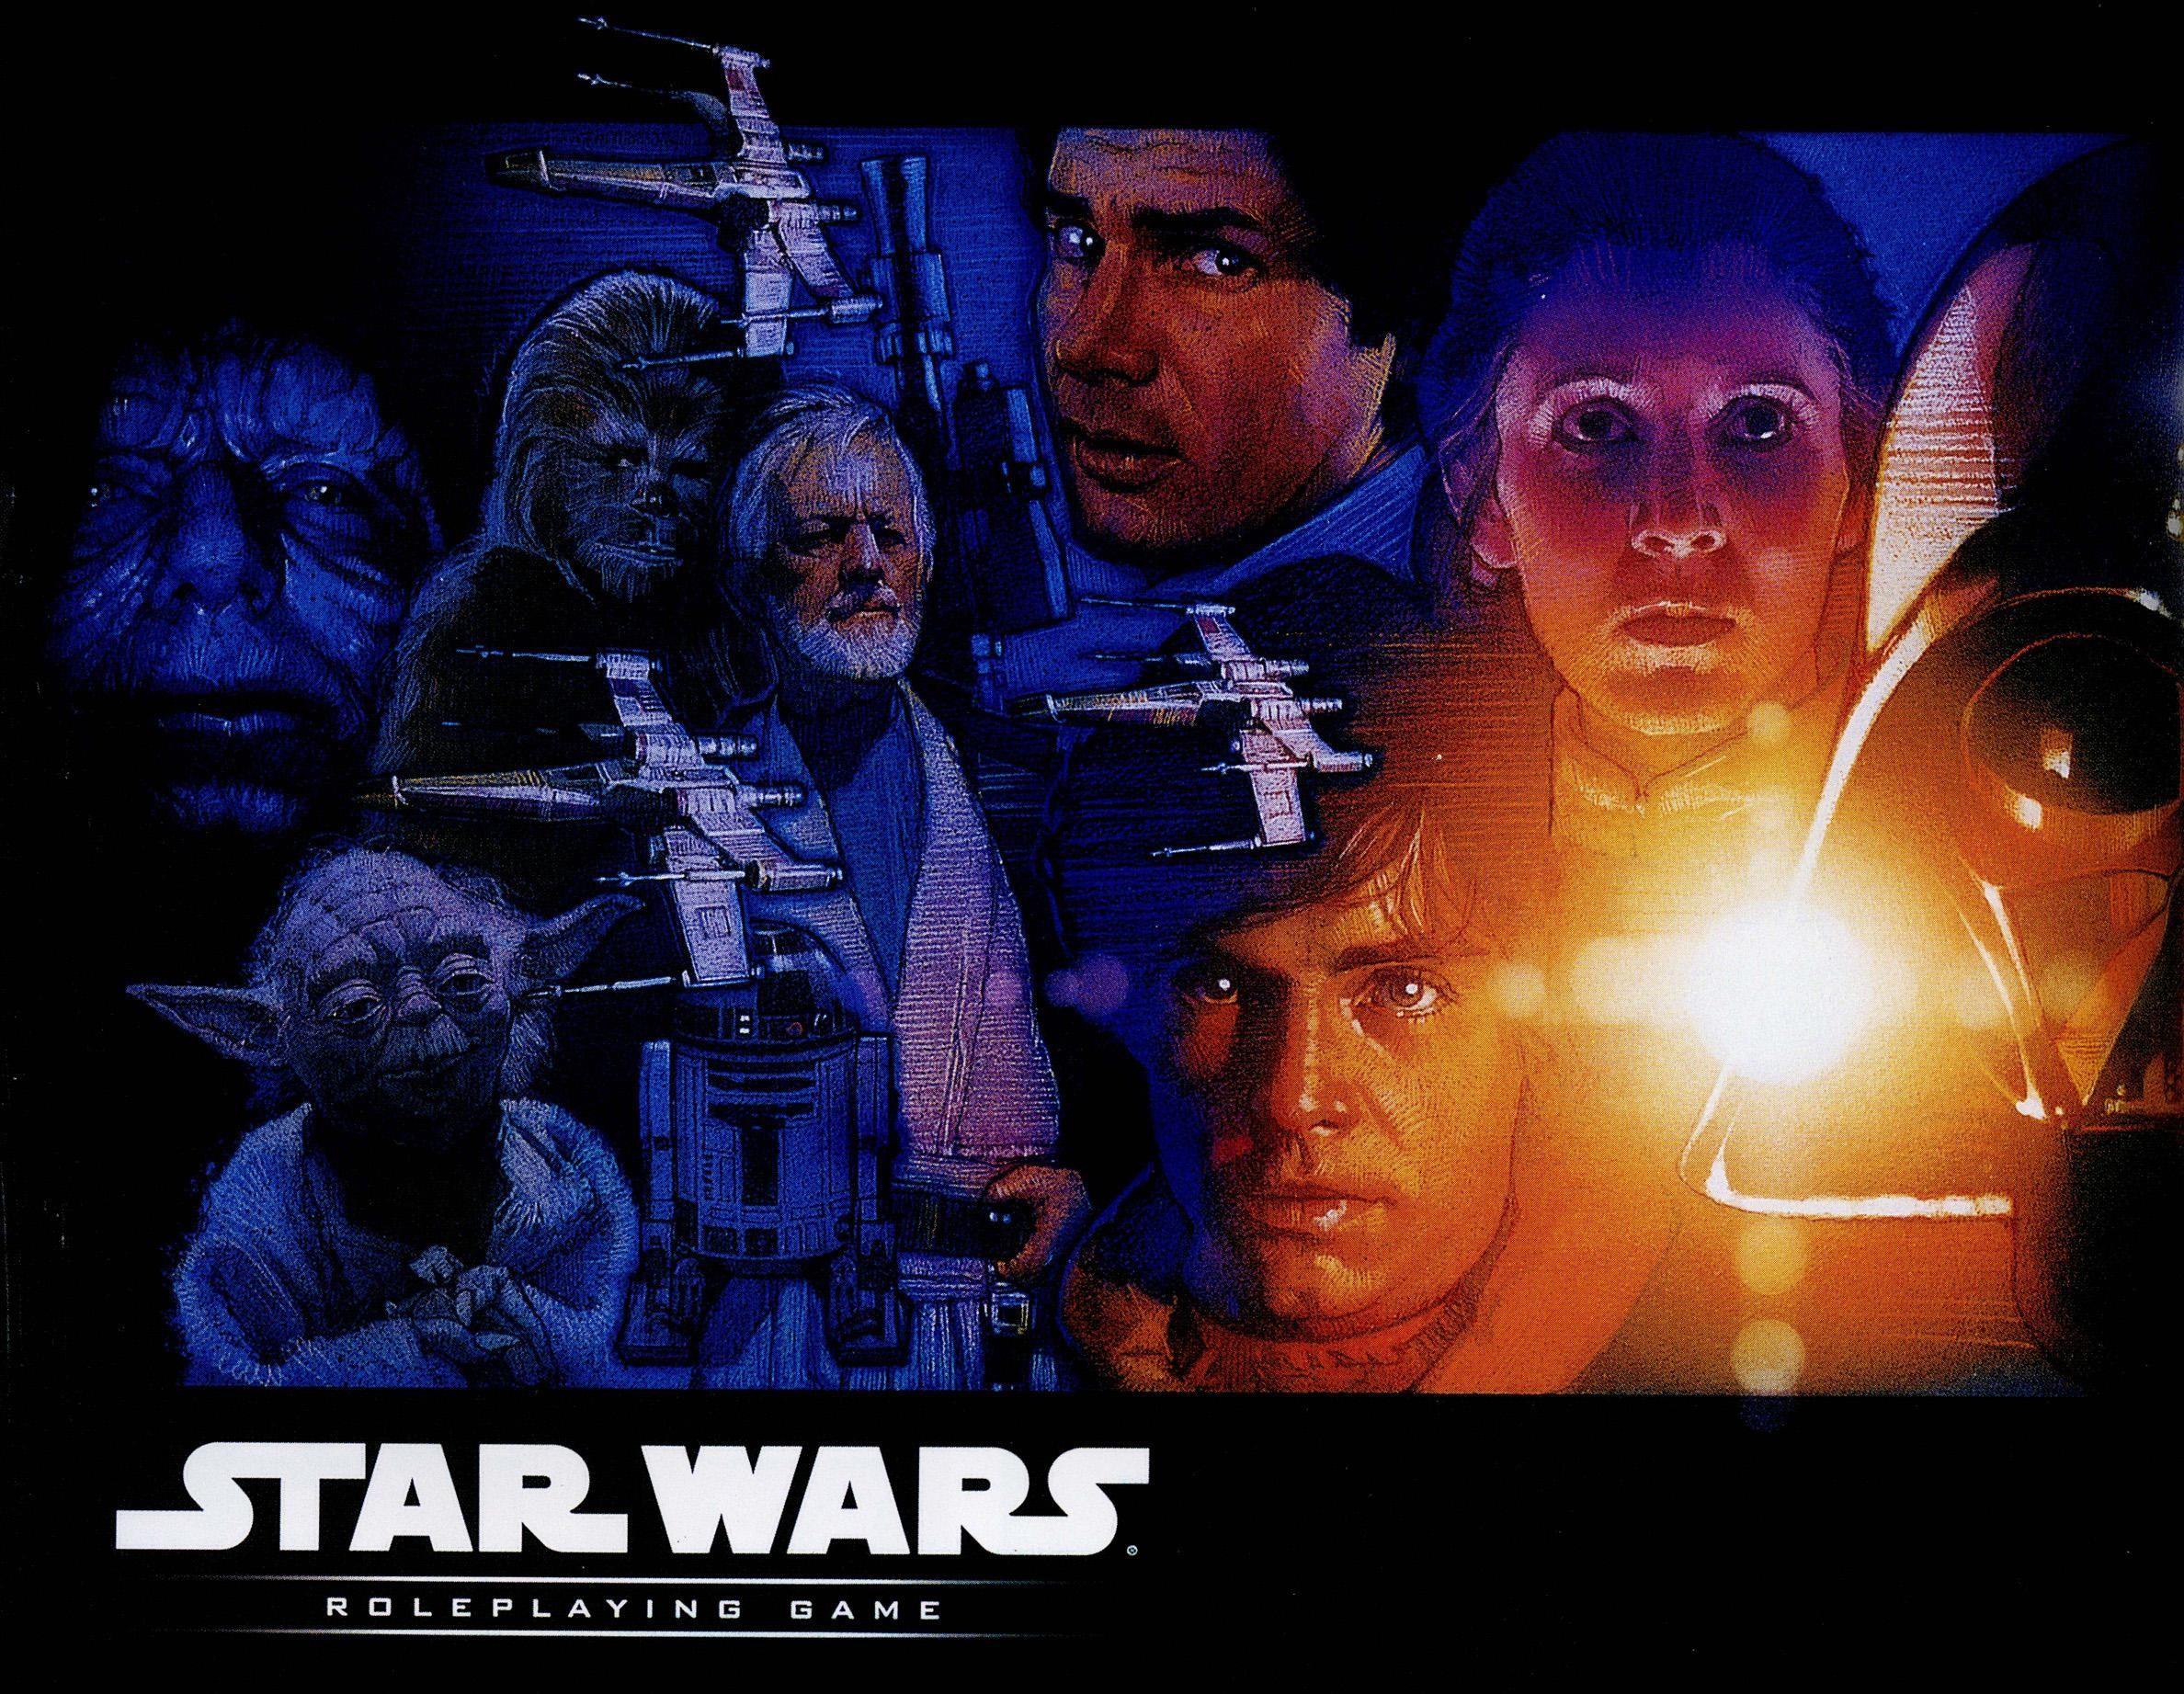 Star Wars. Episode IV. new Hope wallpaper and image